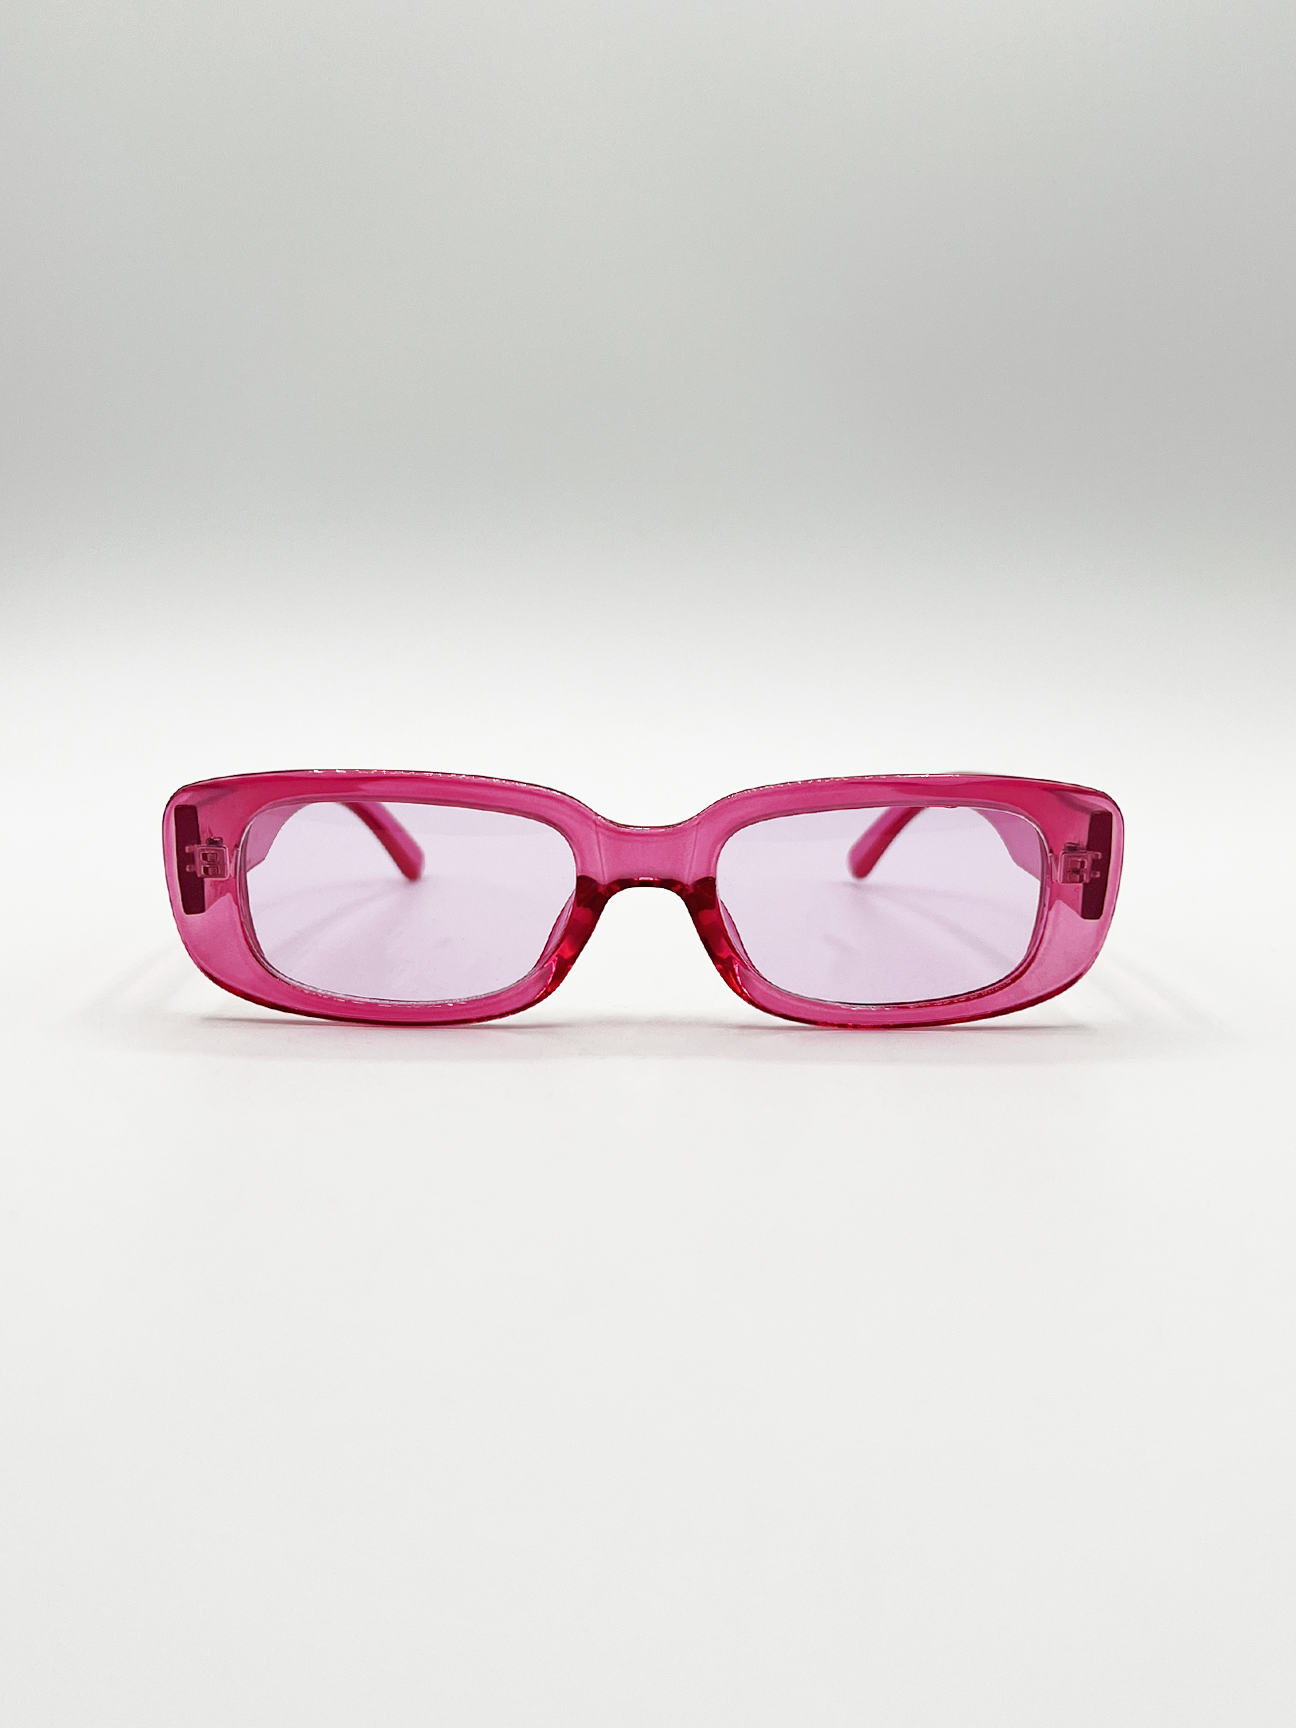 Oval Sunglasses in Translucent Hot Pink